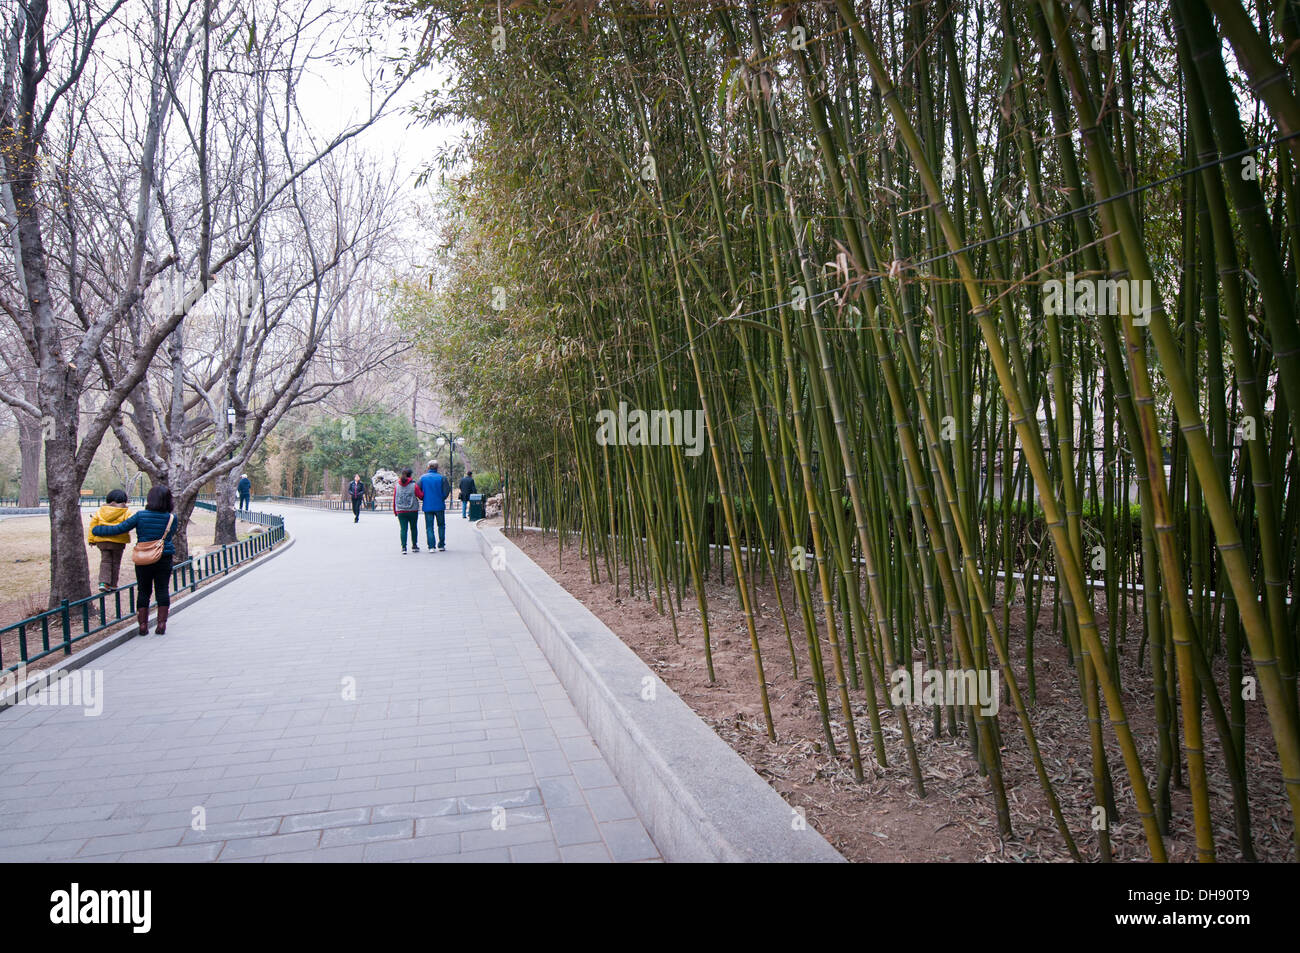 Phyllostachys propinqua bamboo, Zizhuyuan Park commonly known as Purple or Black Bamboo Park in Haidian District, Beijing, China Stock Photo